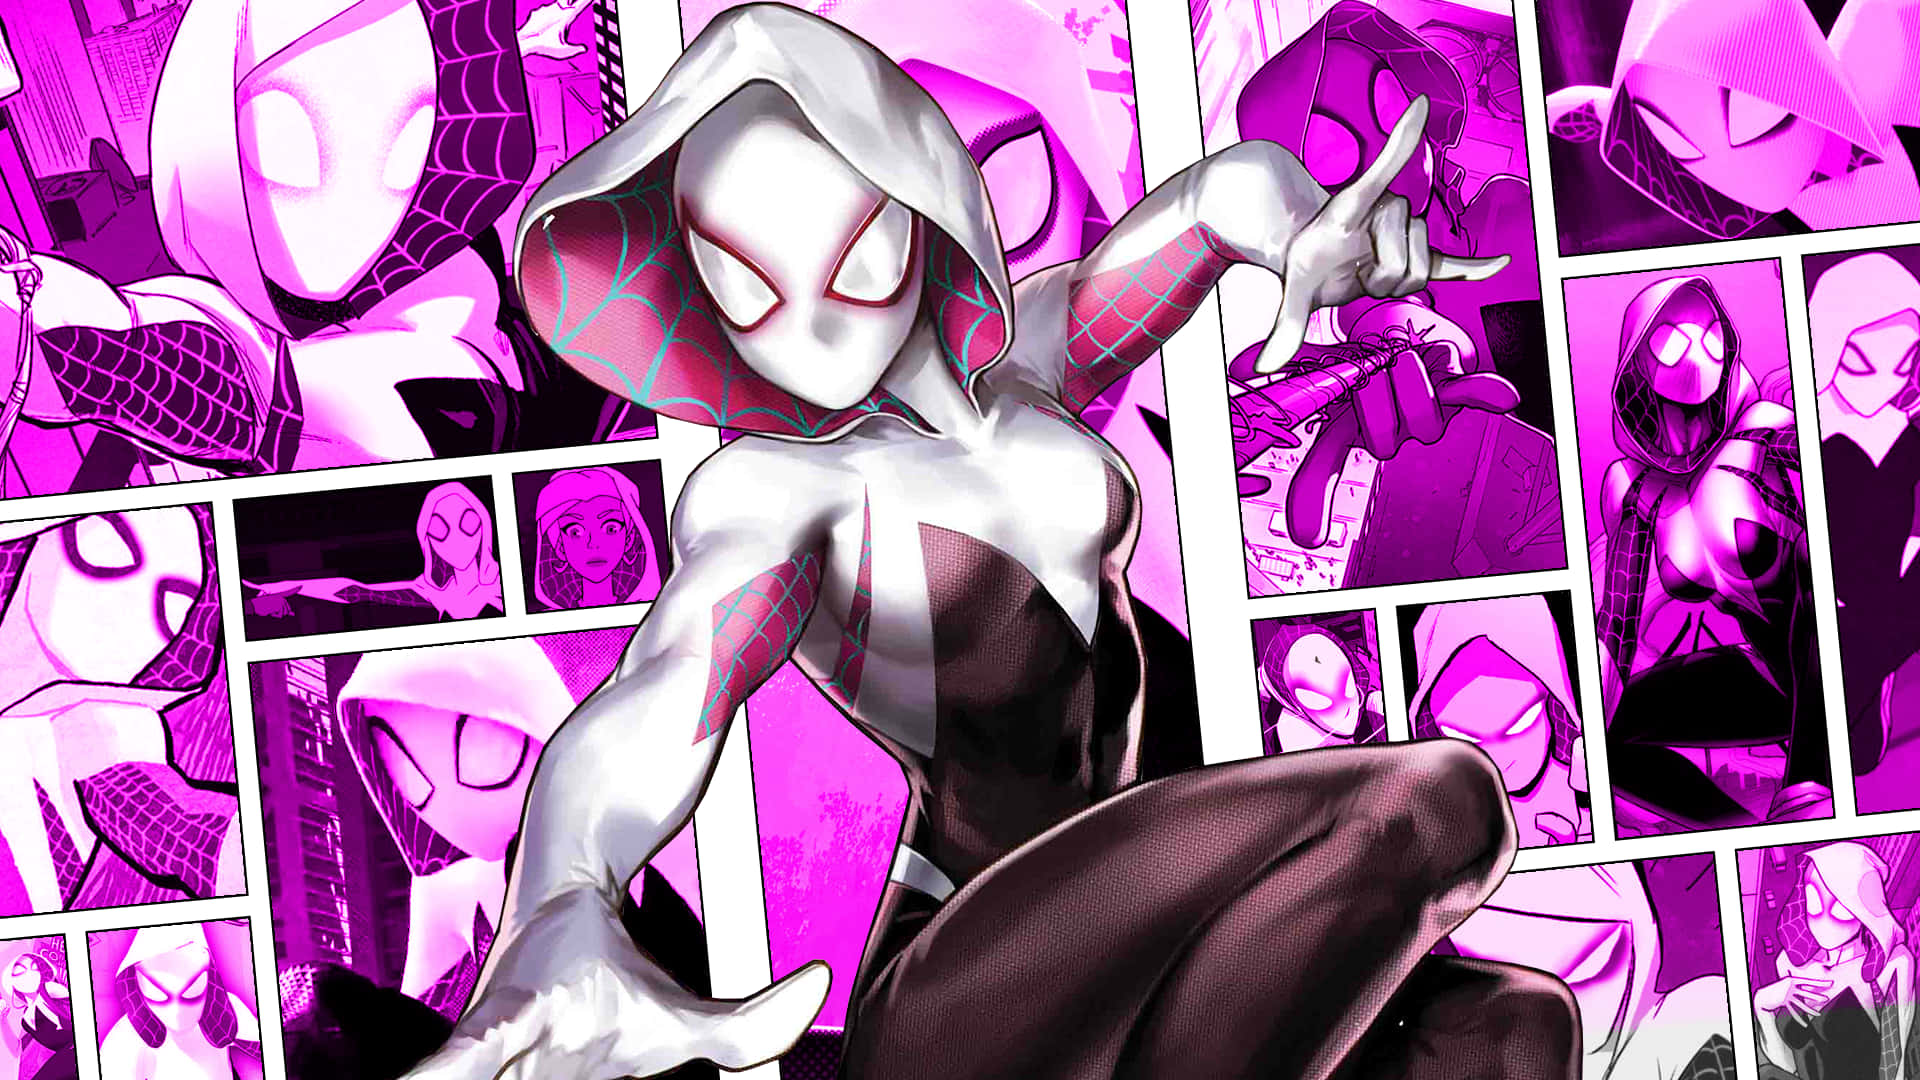 "Spider Gwen Uses Her Super Powers to Conquer Evil"